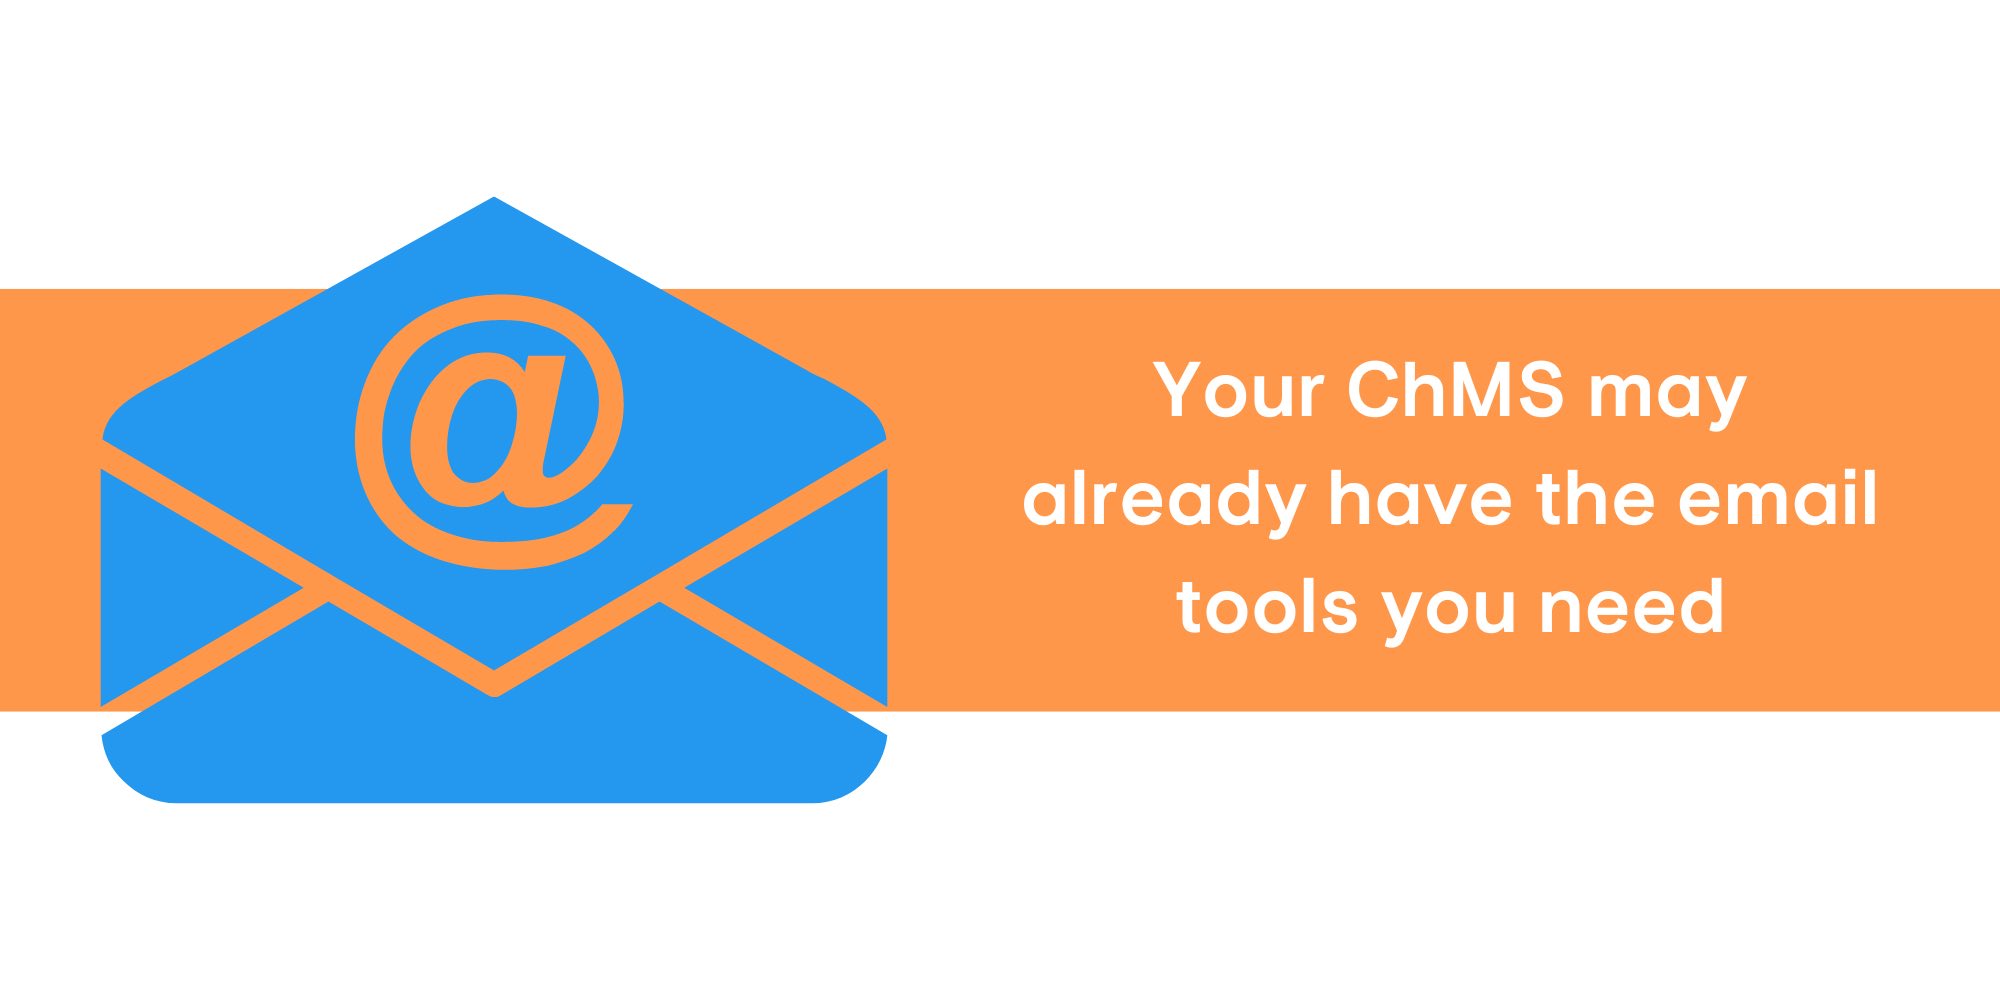 Your ChMS may already have the email tools you need